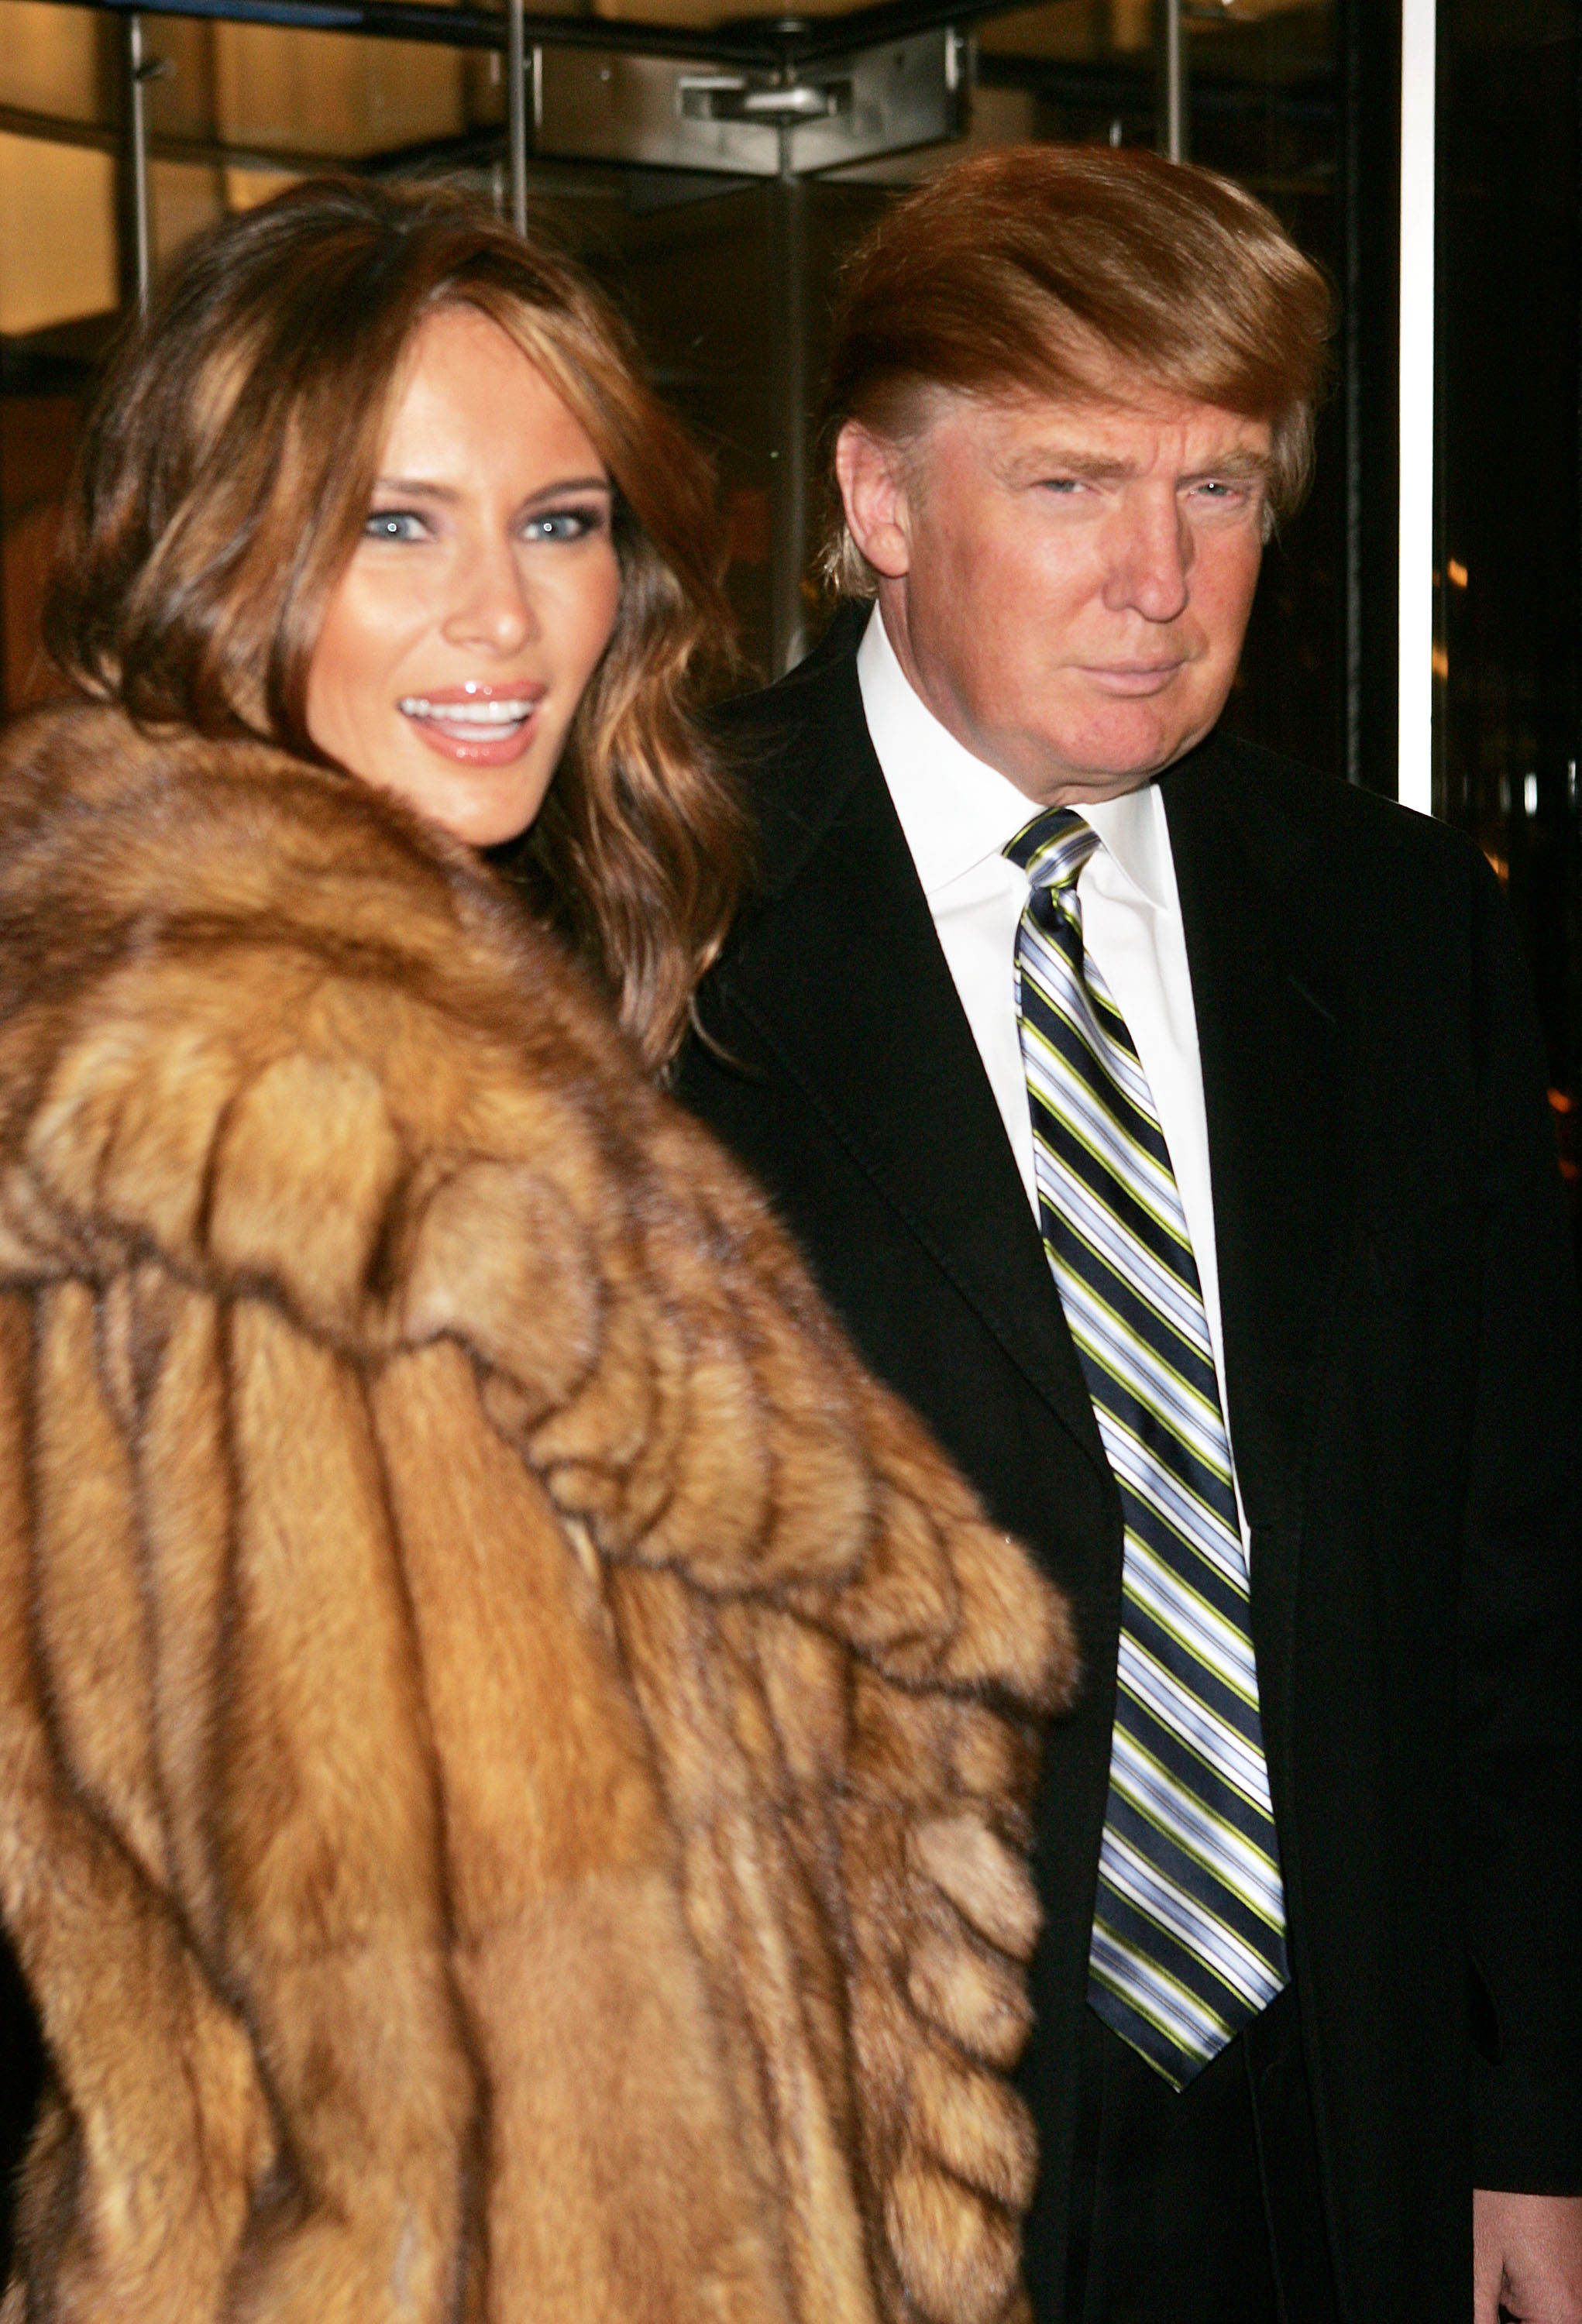 NEW YORK - DECEMBER 13: Businessman Donald Trump and his fiance Melania Knauss arrive at a gala to honor leaders in tourism sponsored by NYC & Company at the Museum of Modern Art December 13, 2004 in New York City. (Photo by Scott Gries/Getty Images)